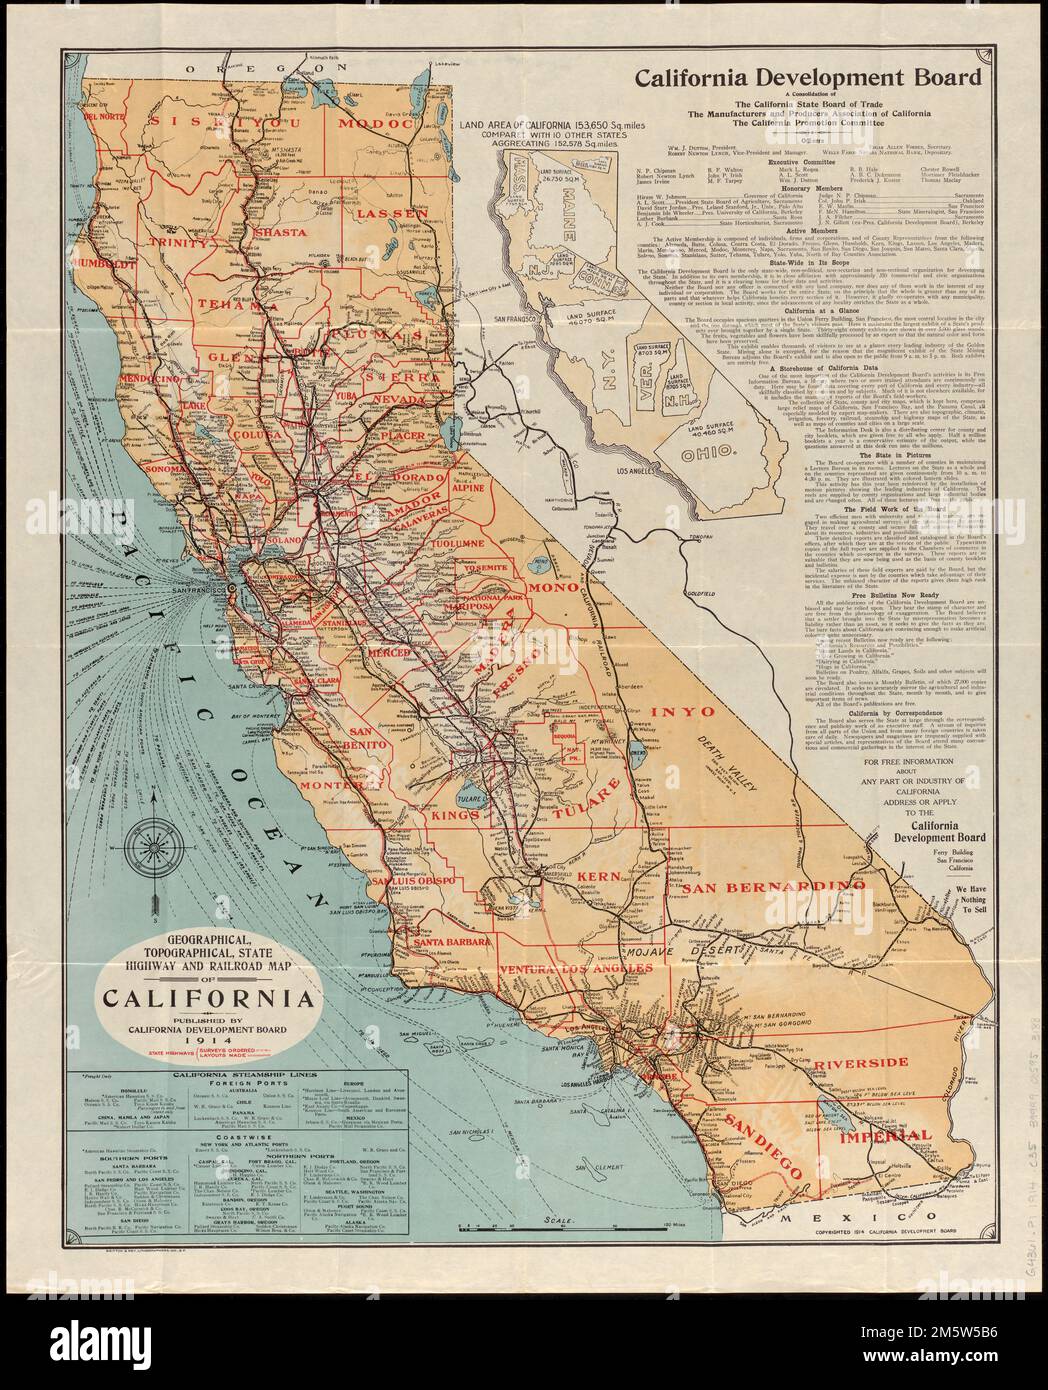 Geographical, topographical, state highway and railroad map of California. Relief shown by hachures and spot heights. Includes text, chart of steamship lines, and a map comparing size of California with other states. Shows highways, railroads and steamship lines.... , California Stock Photo